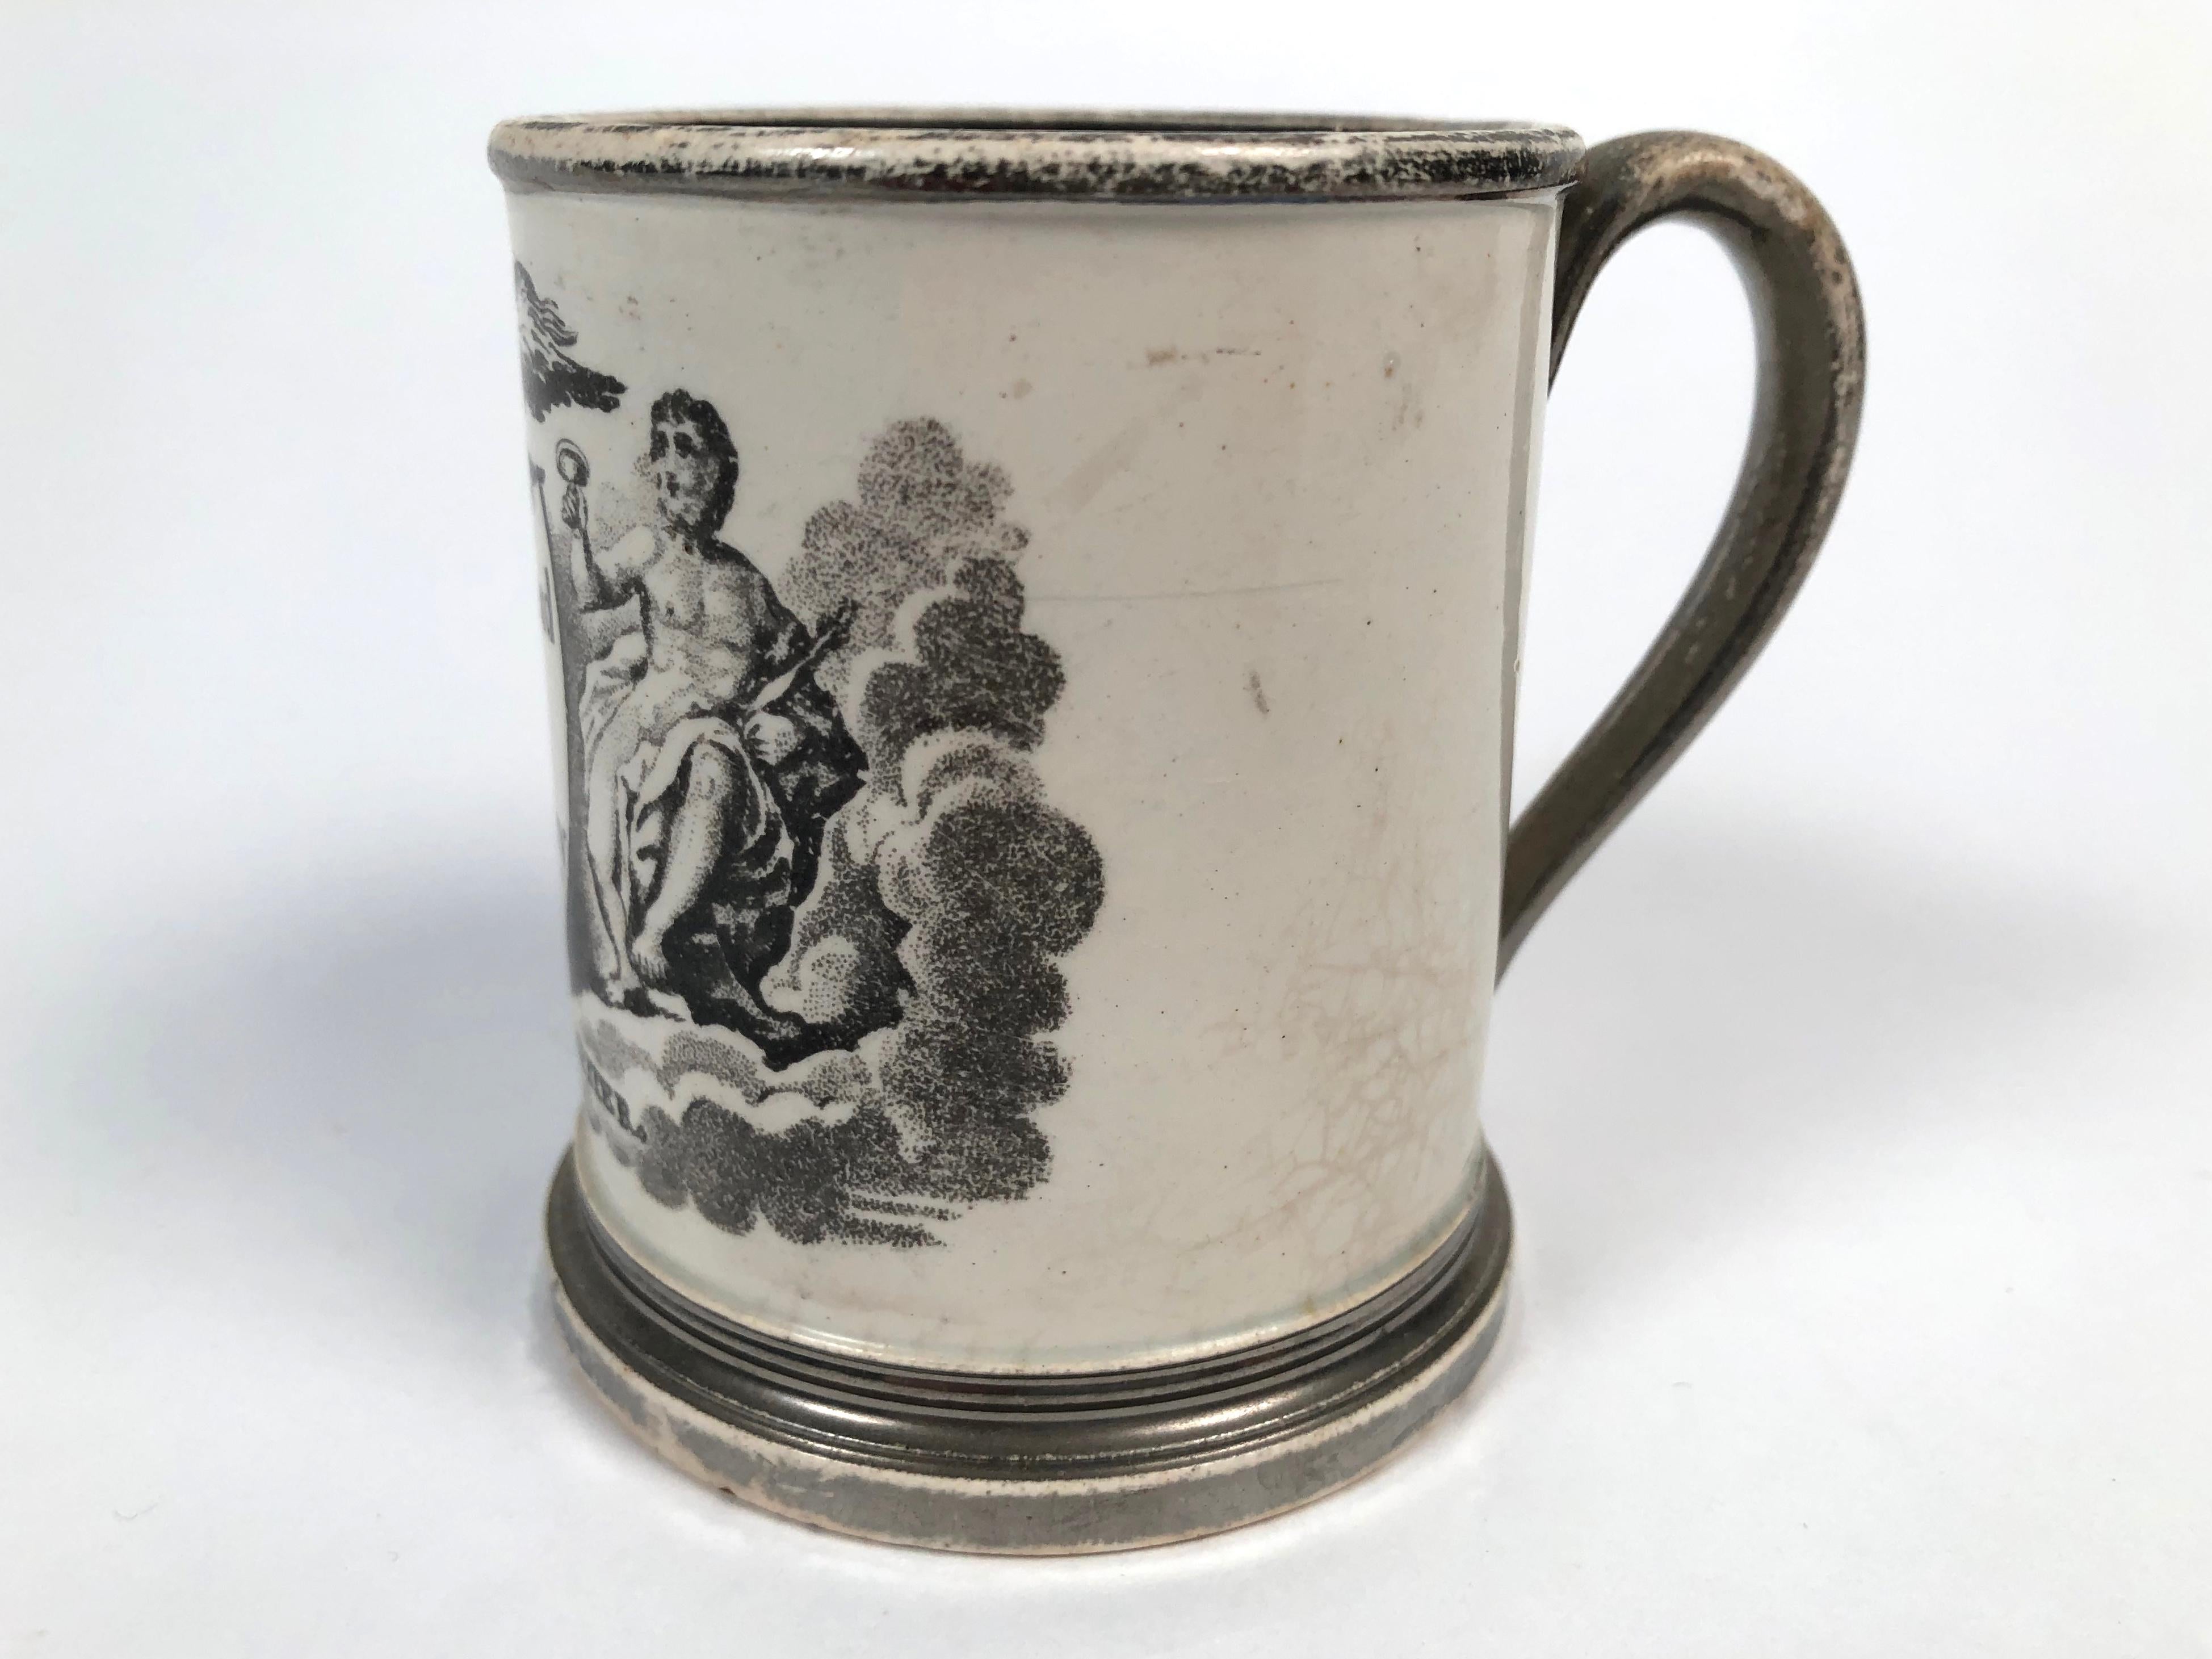 A small English neoclassical Staffordshire black transfeware pottery cup with the words a reward for Industry printed on a shield, in the center, surmounted by an eagle and flanked, on the left, by Hebe, holding a vessel, and, on the right, Jupiter